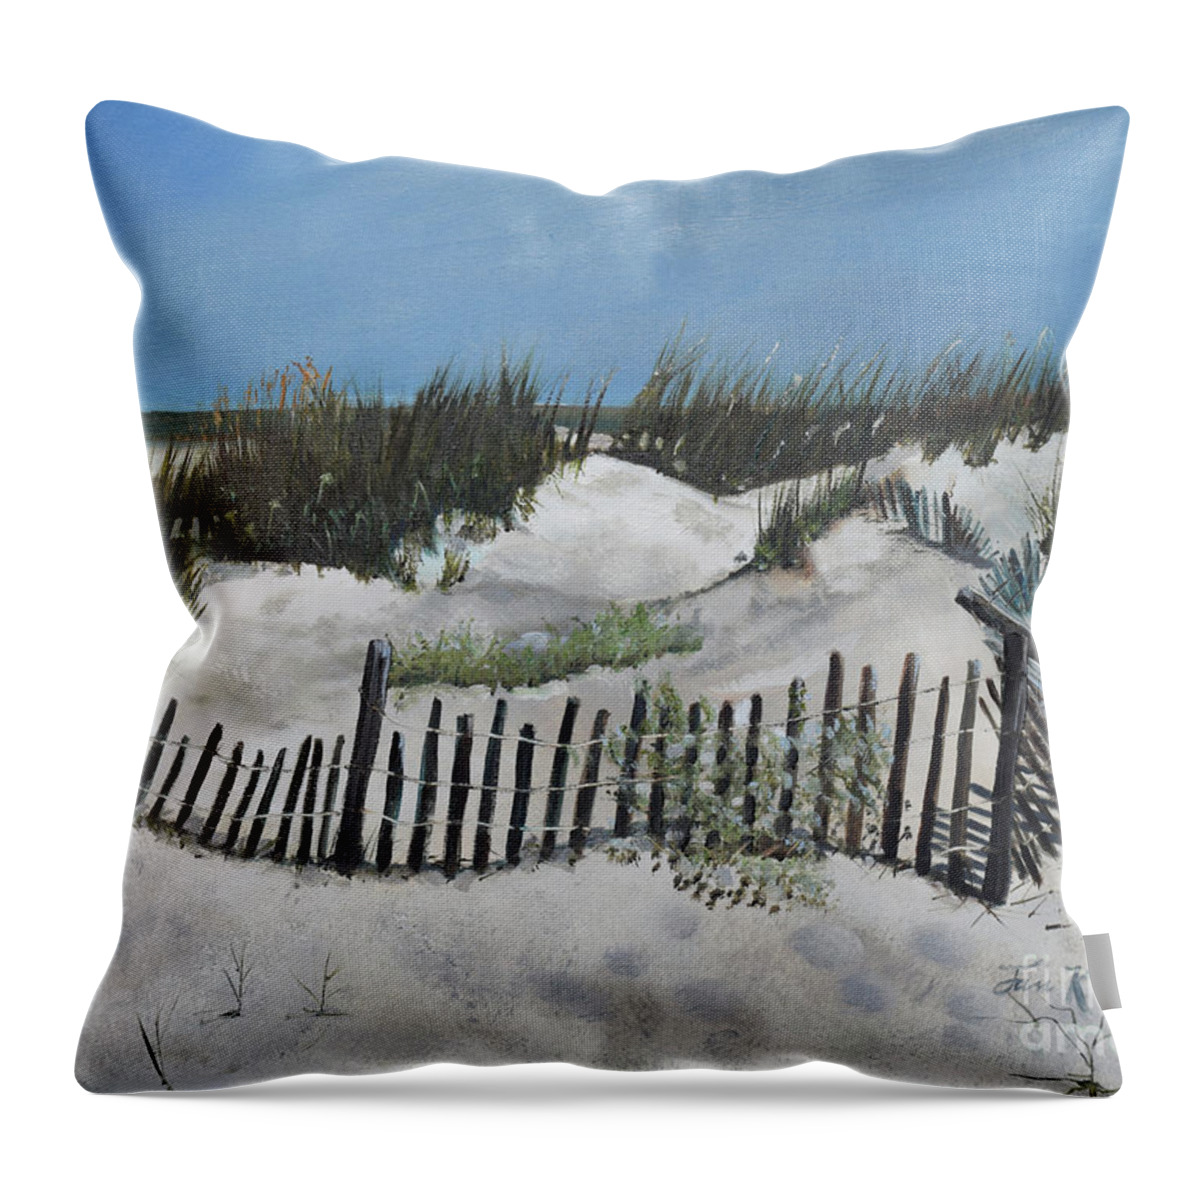  Throw Pillow featuring the painting Jeklyll Island Great Sand Dunes by Jan Dappen